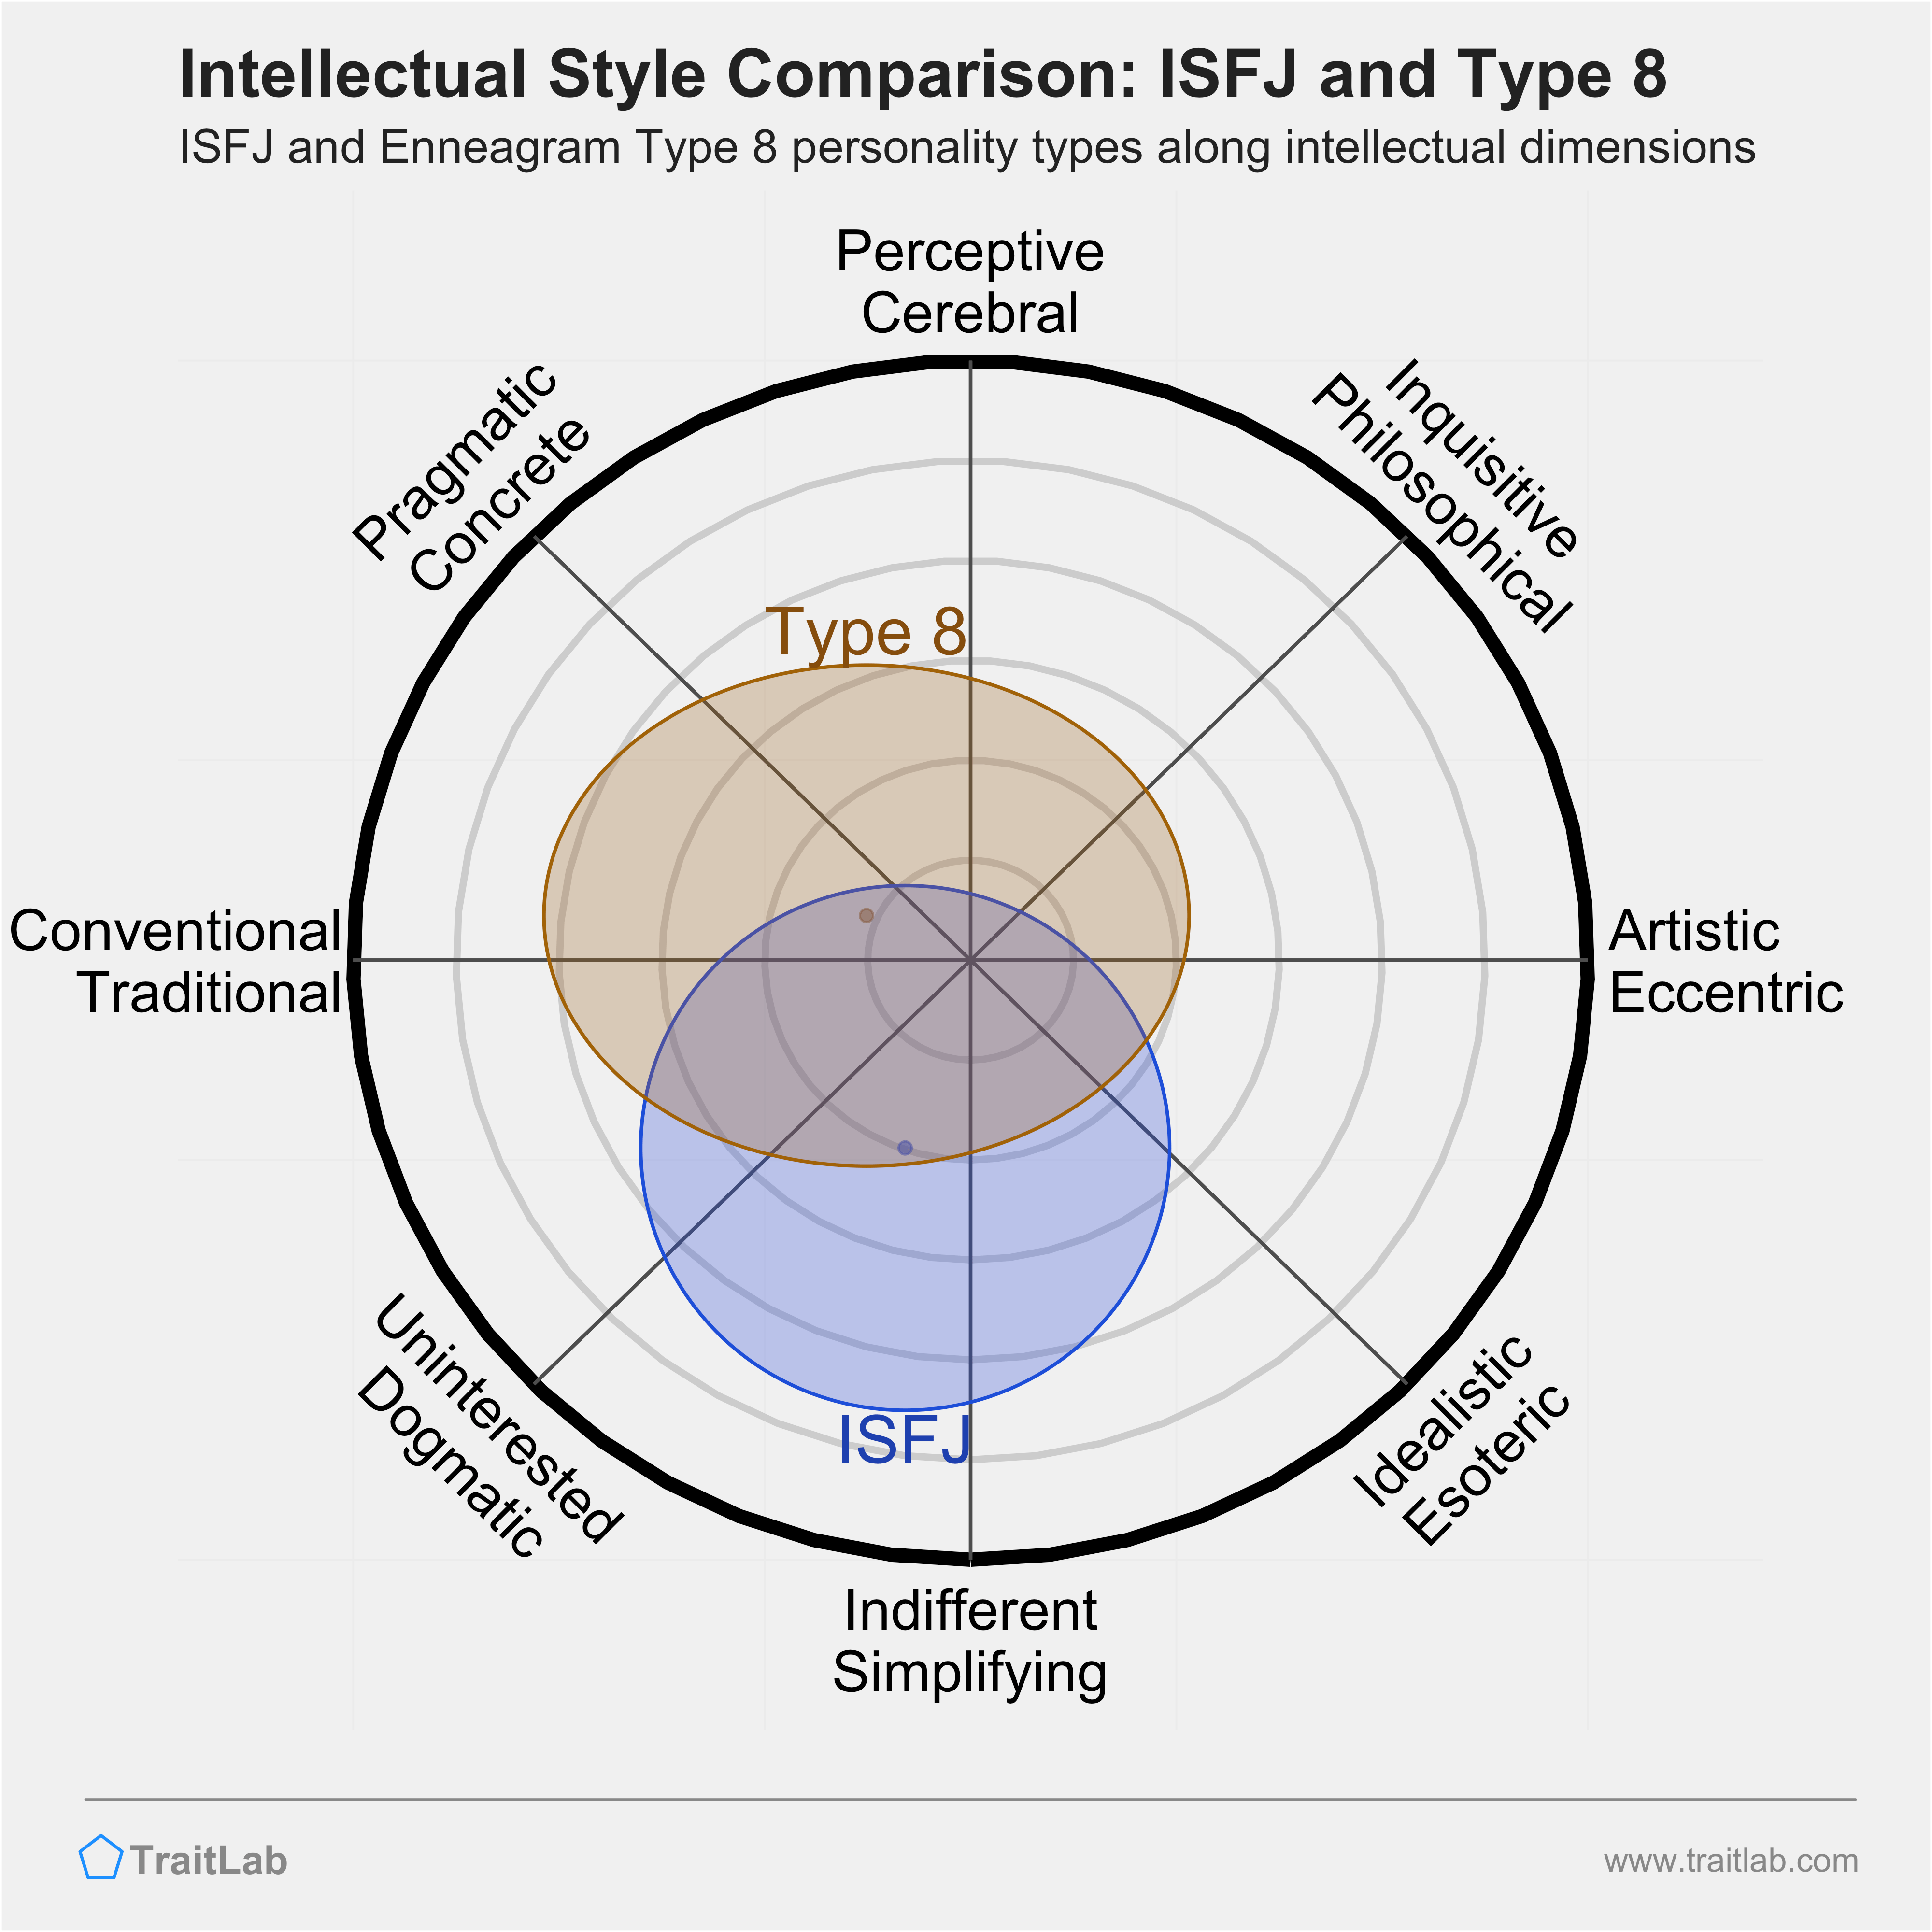 ISFJ and Type 8 comparison across intellectual dimensions